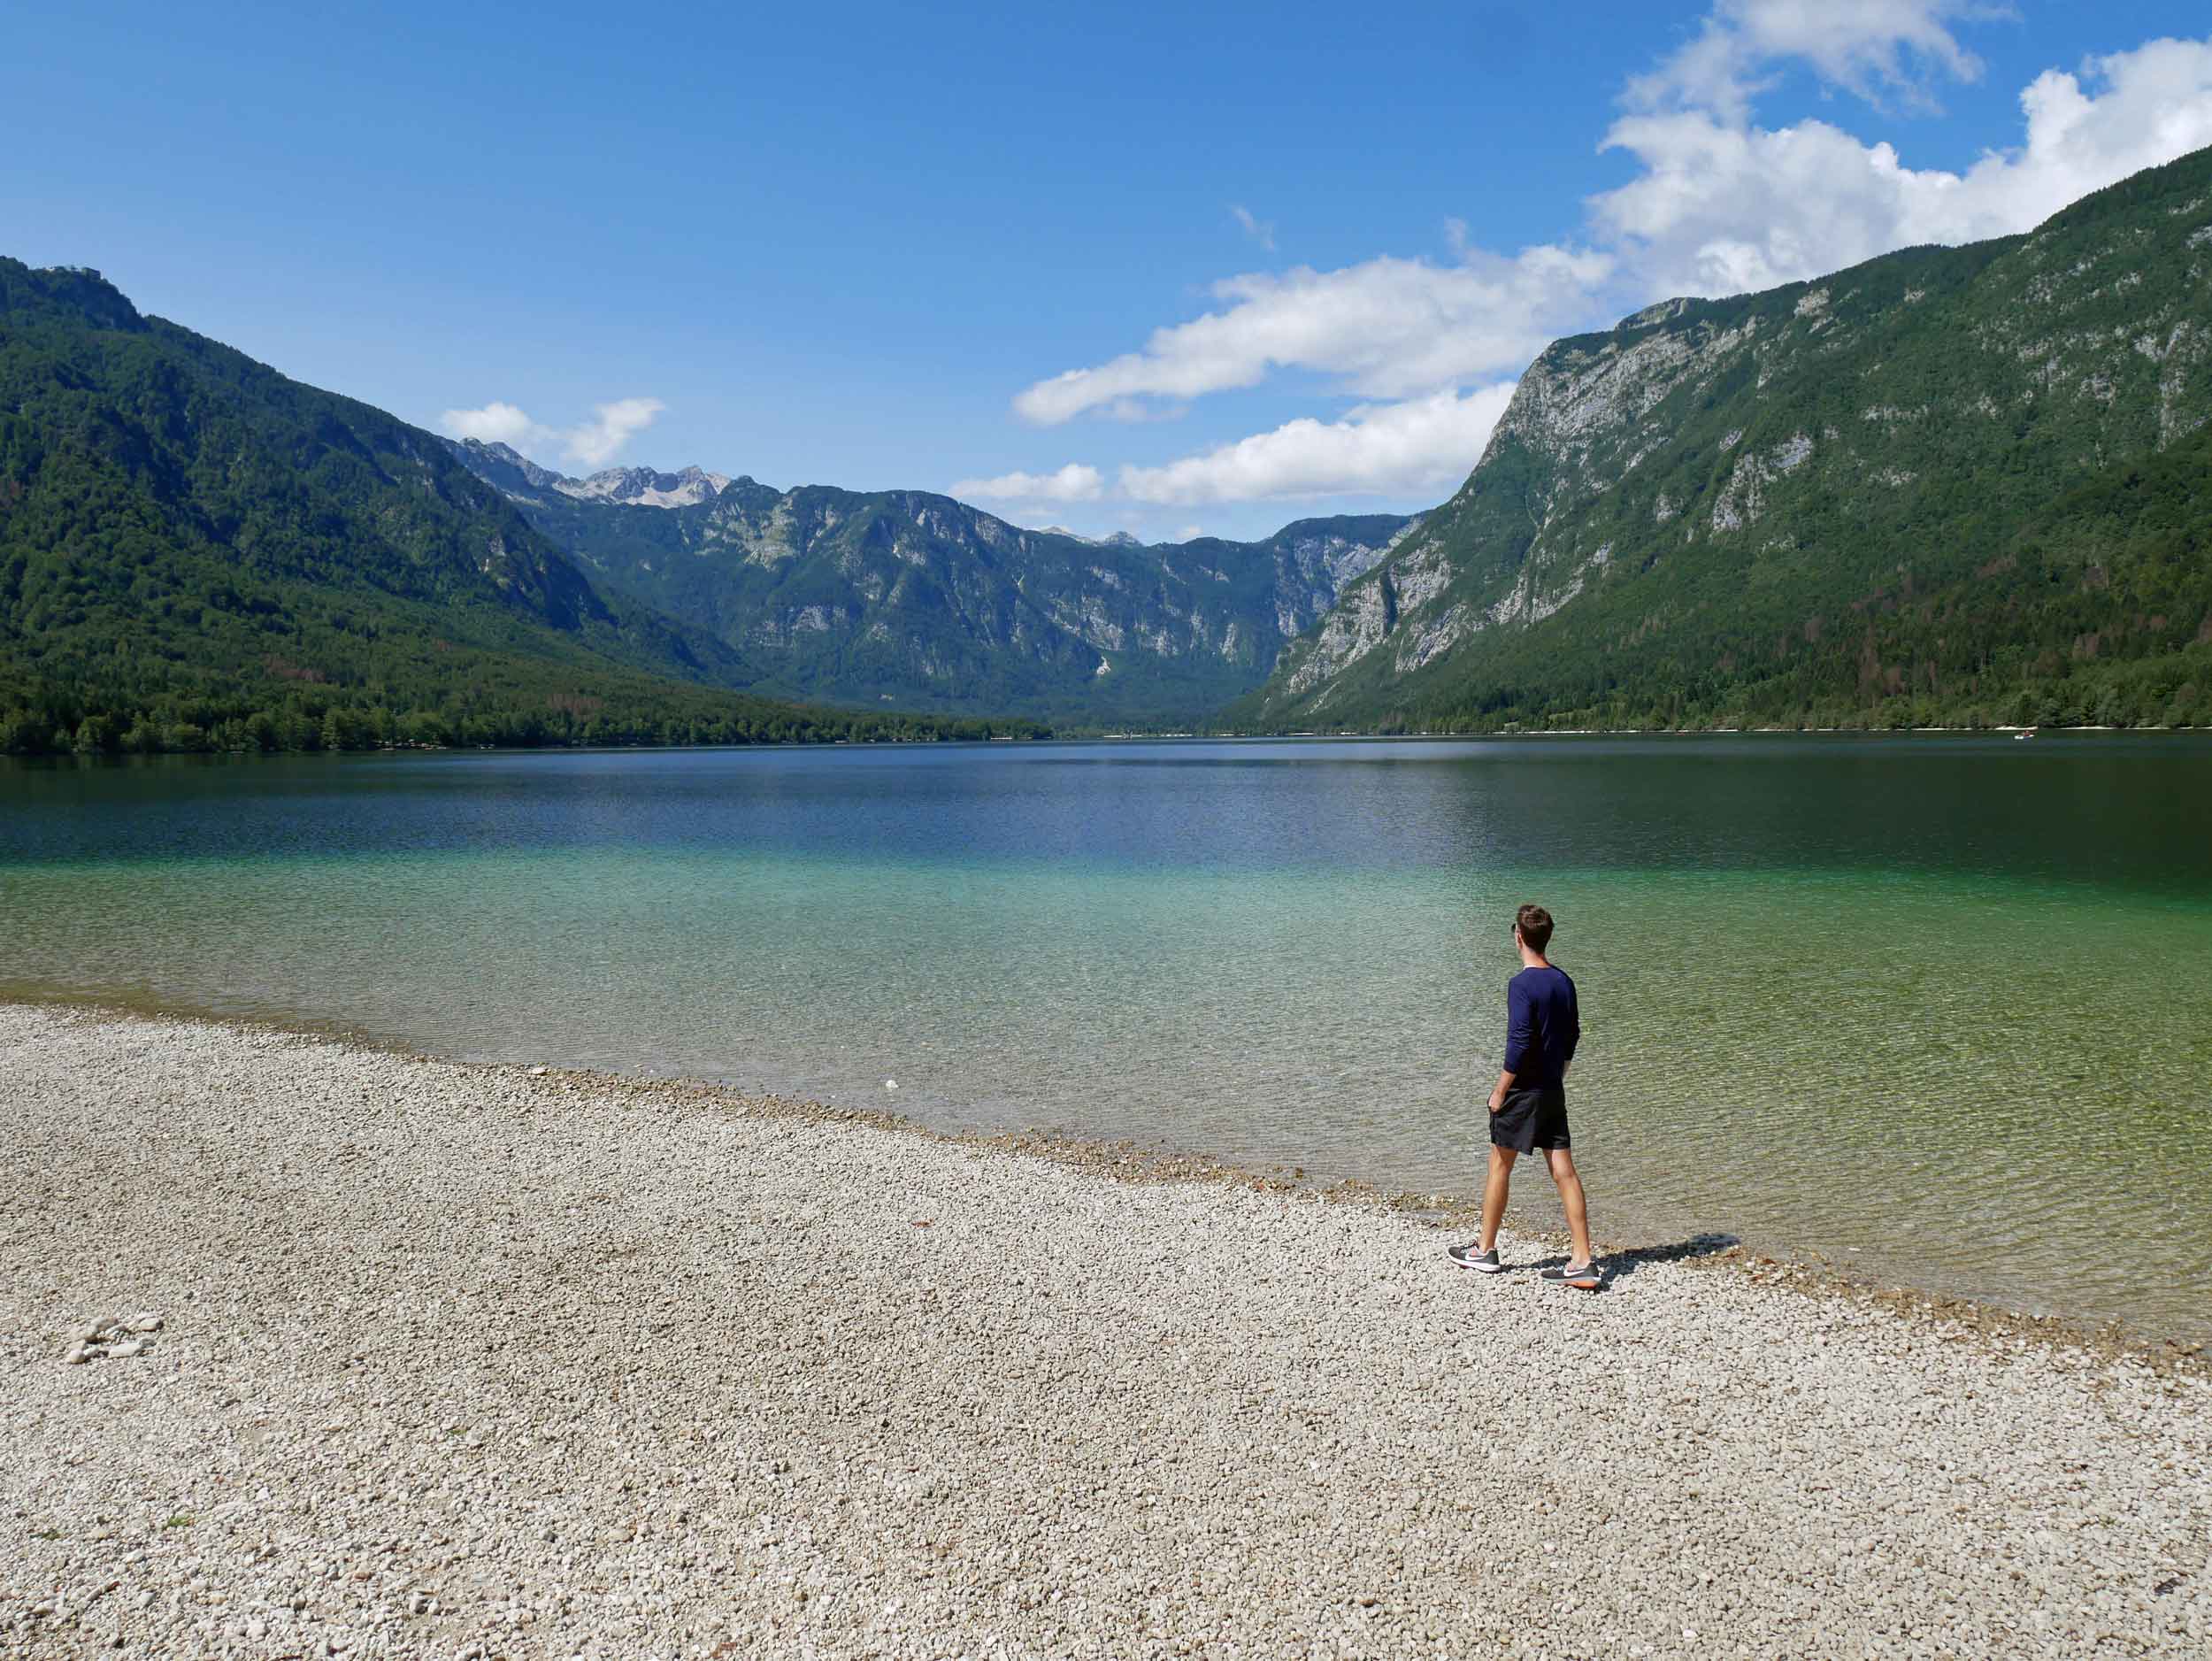  We spent the day at Slovenia's largest lake, Bohinj, which was active with kayaks, volleyball and cyclists.&nbsp;&nbsp; 